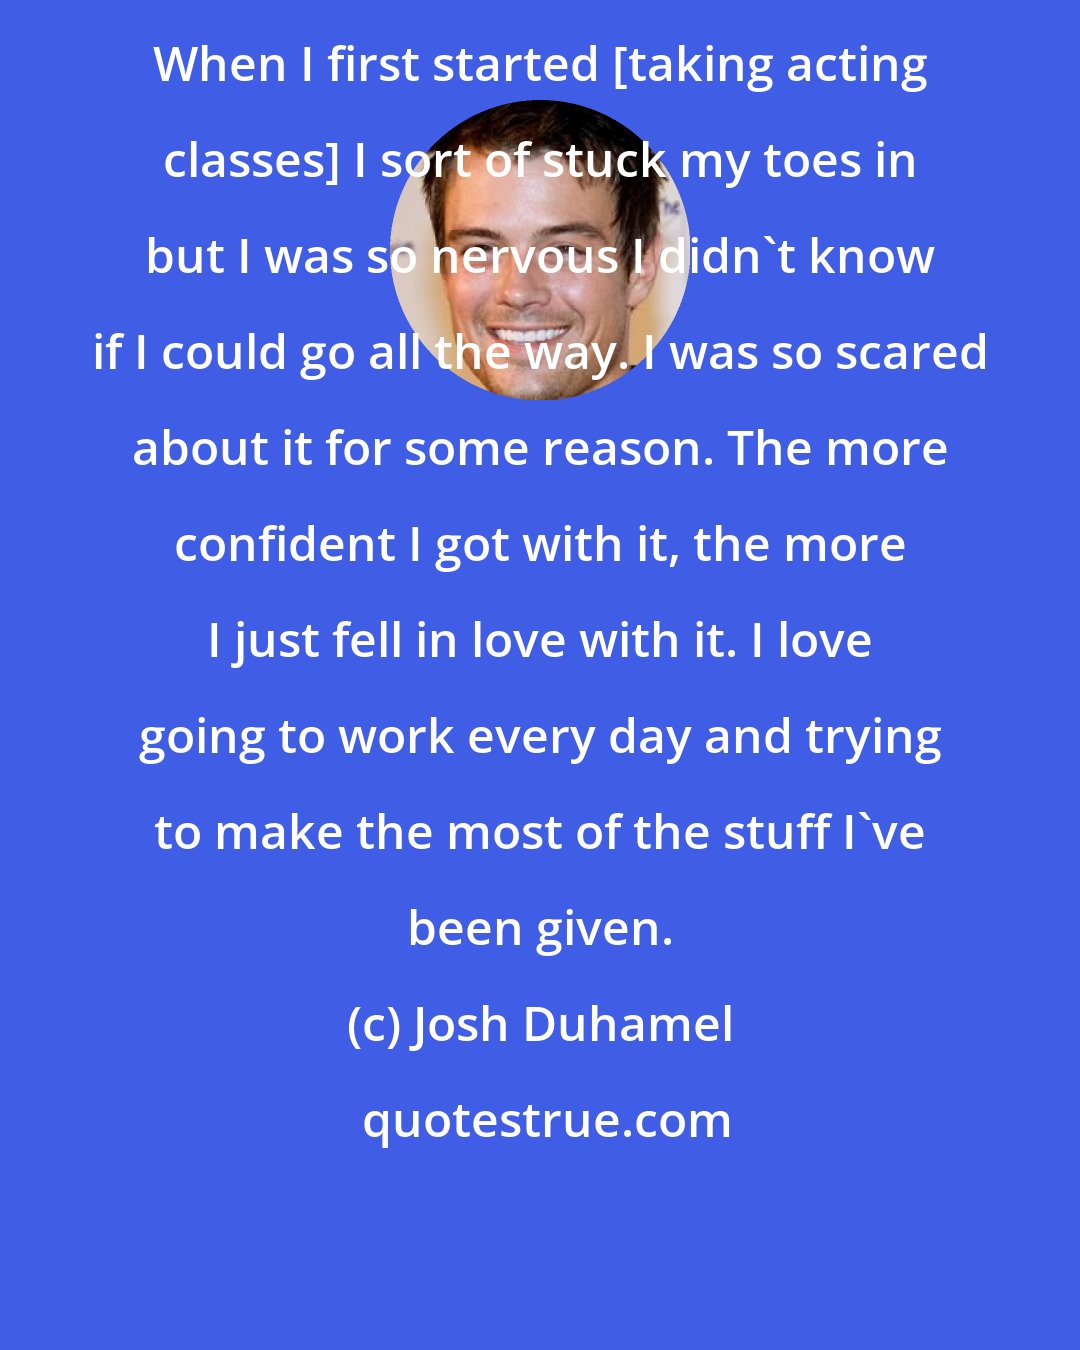 Josh Duhamel: When I first started [taking acting classes] I sort of stuck my toes in but I was so nervous I didn't know if I could go all the way. I was so scared about it for some reason. The more confident I got with it, the more I just fell in love with it. I love going to work every day and trying to make the most of the stuff I've been given.